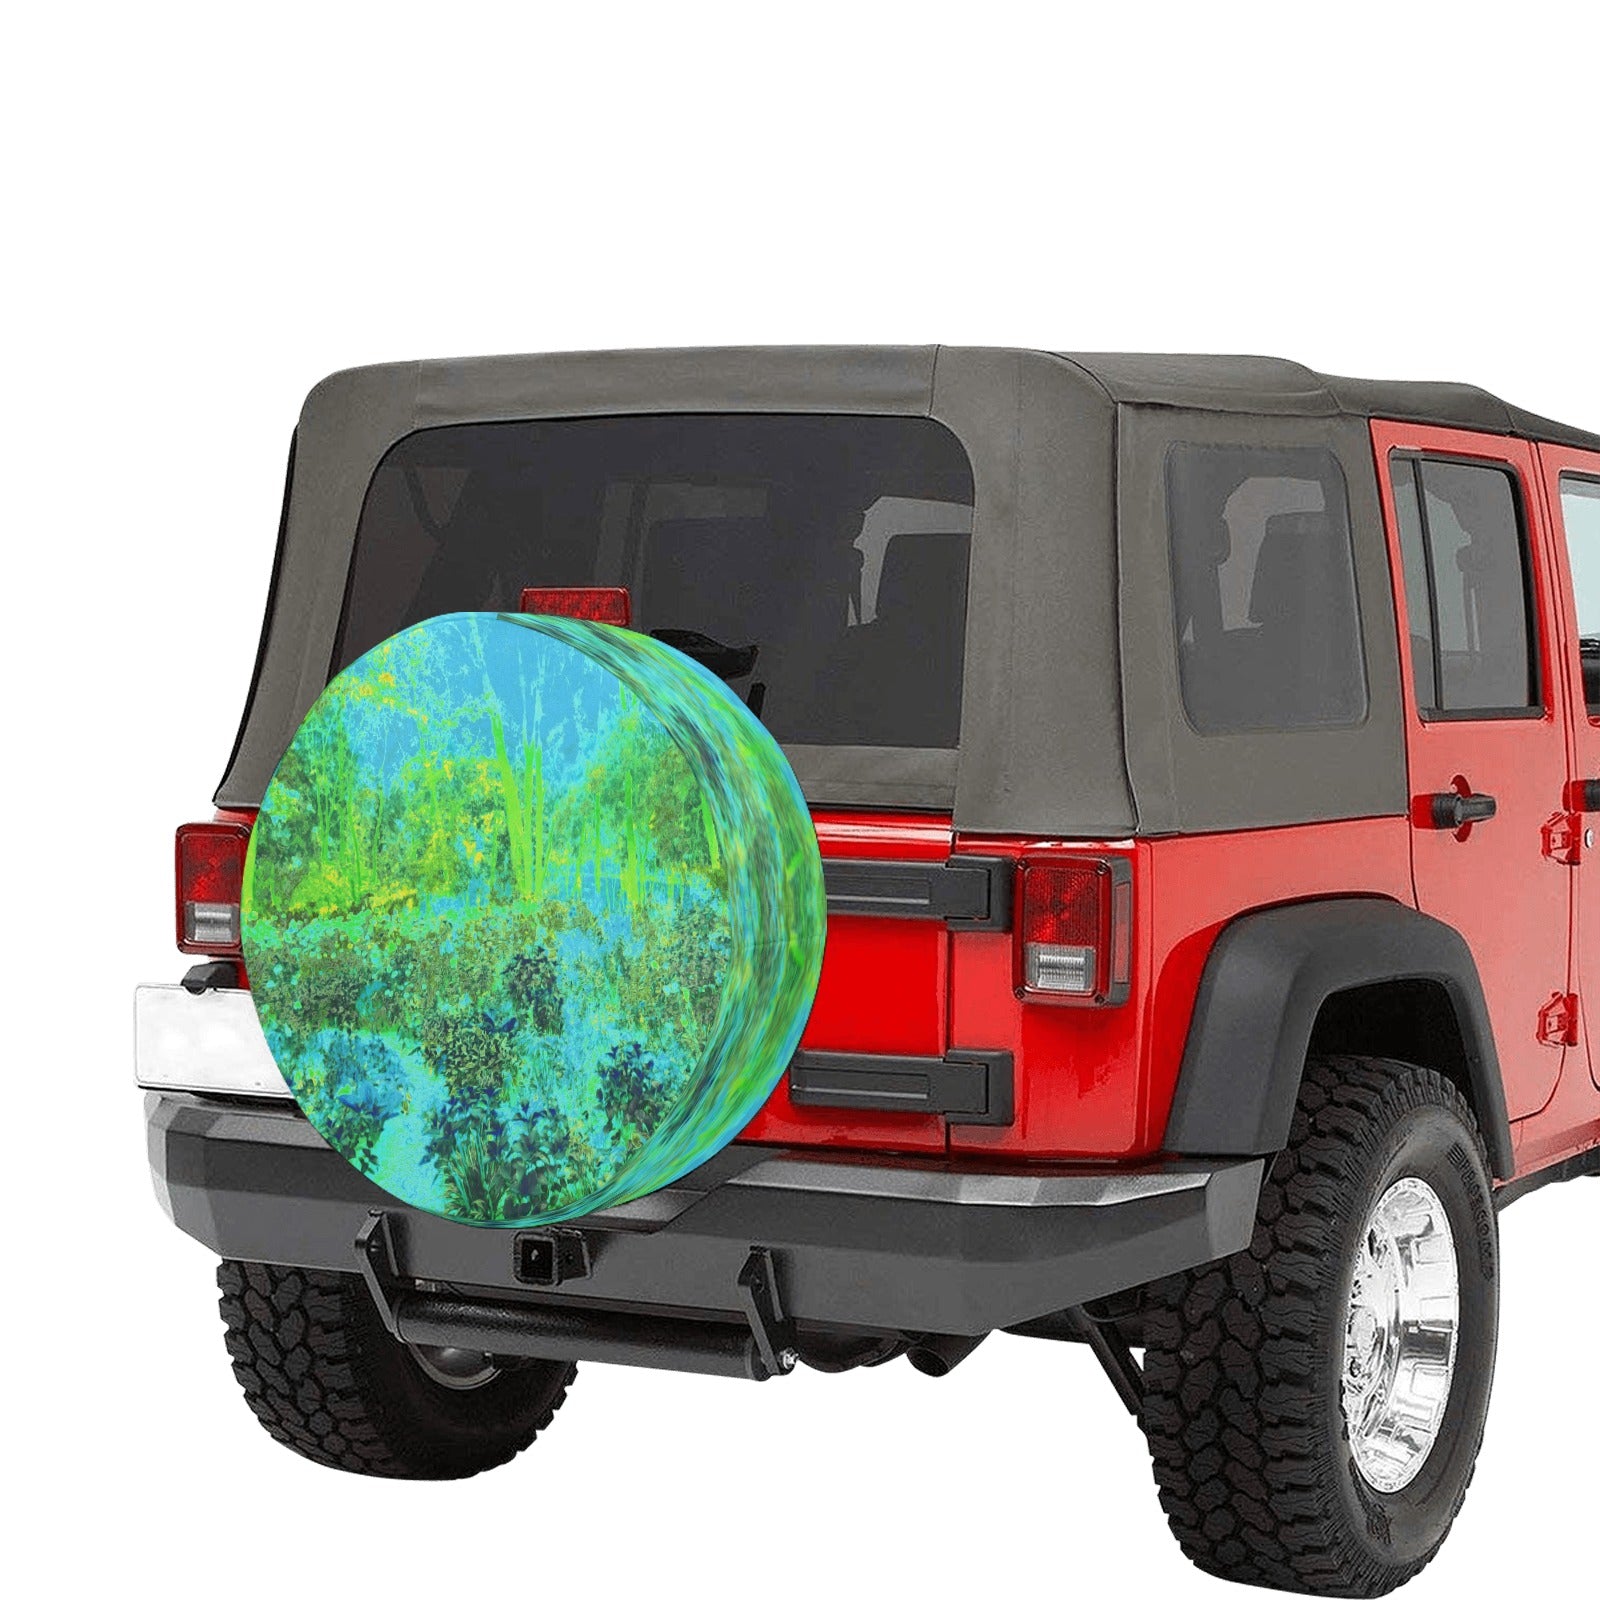 Spare Tire Covers, Trippy Lime Green and Blue Impressionistic Landscape - Small